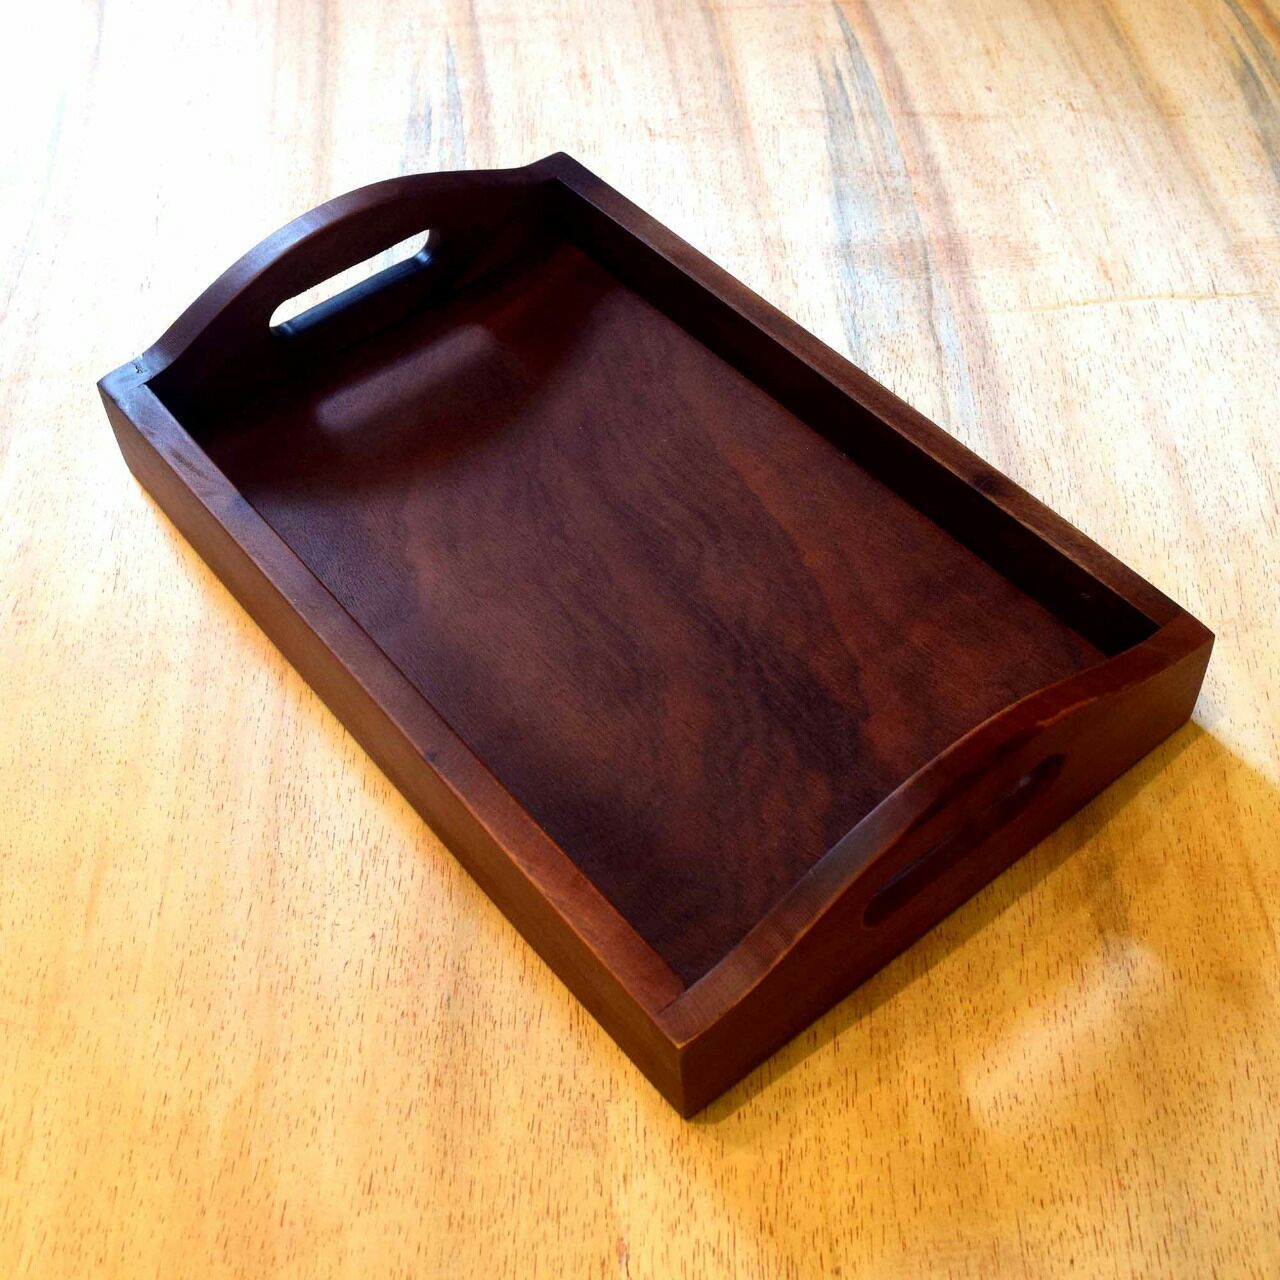 Wood Serving Tray Tea Fruit Food Server Dishes Plate Wooden Rectangular Tray 